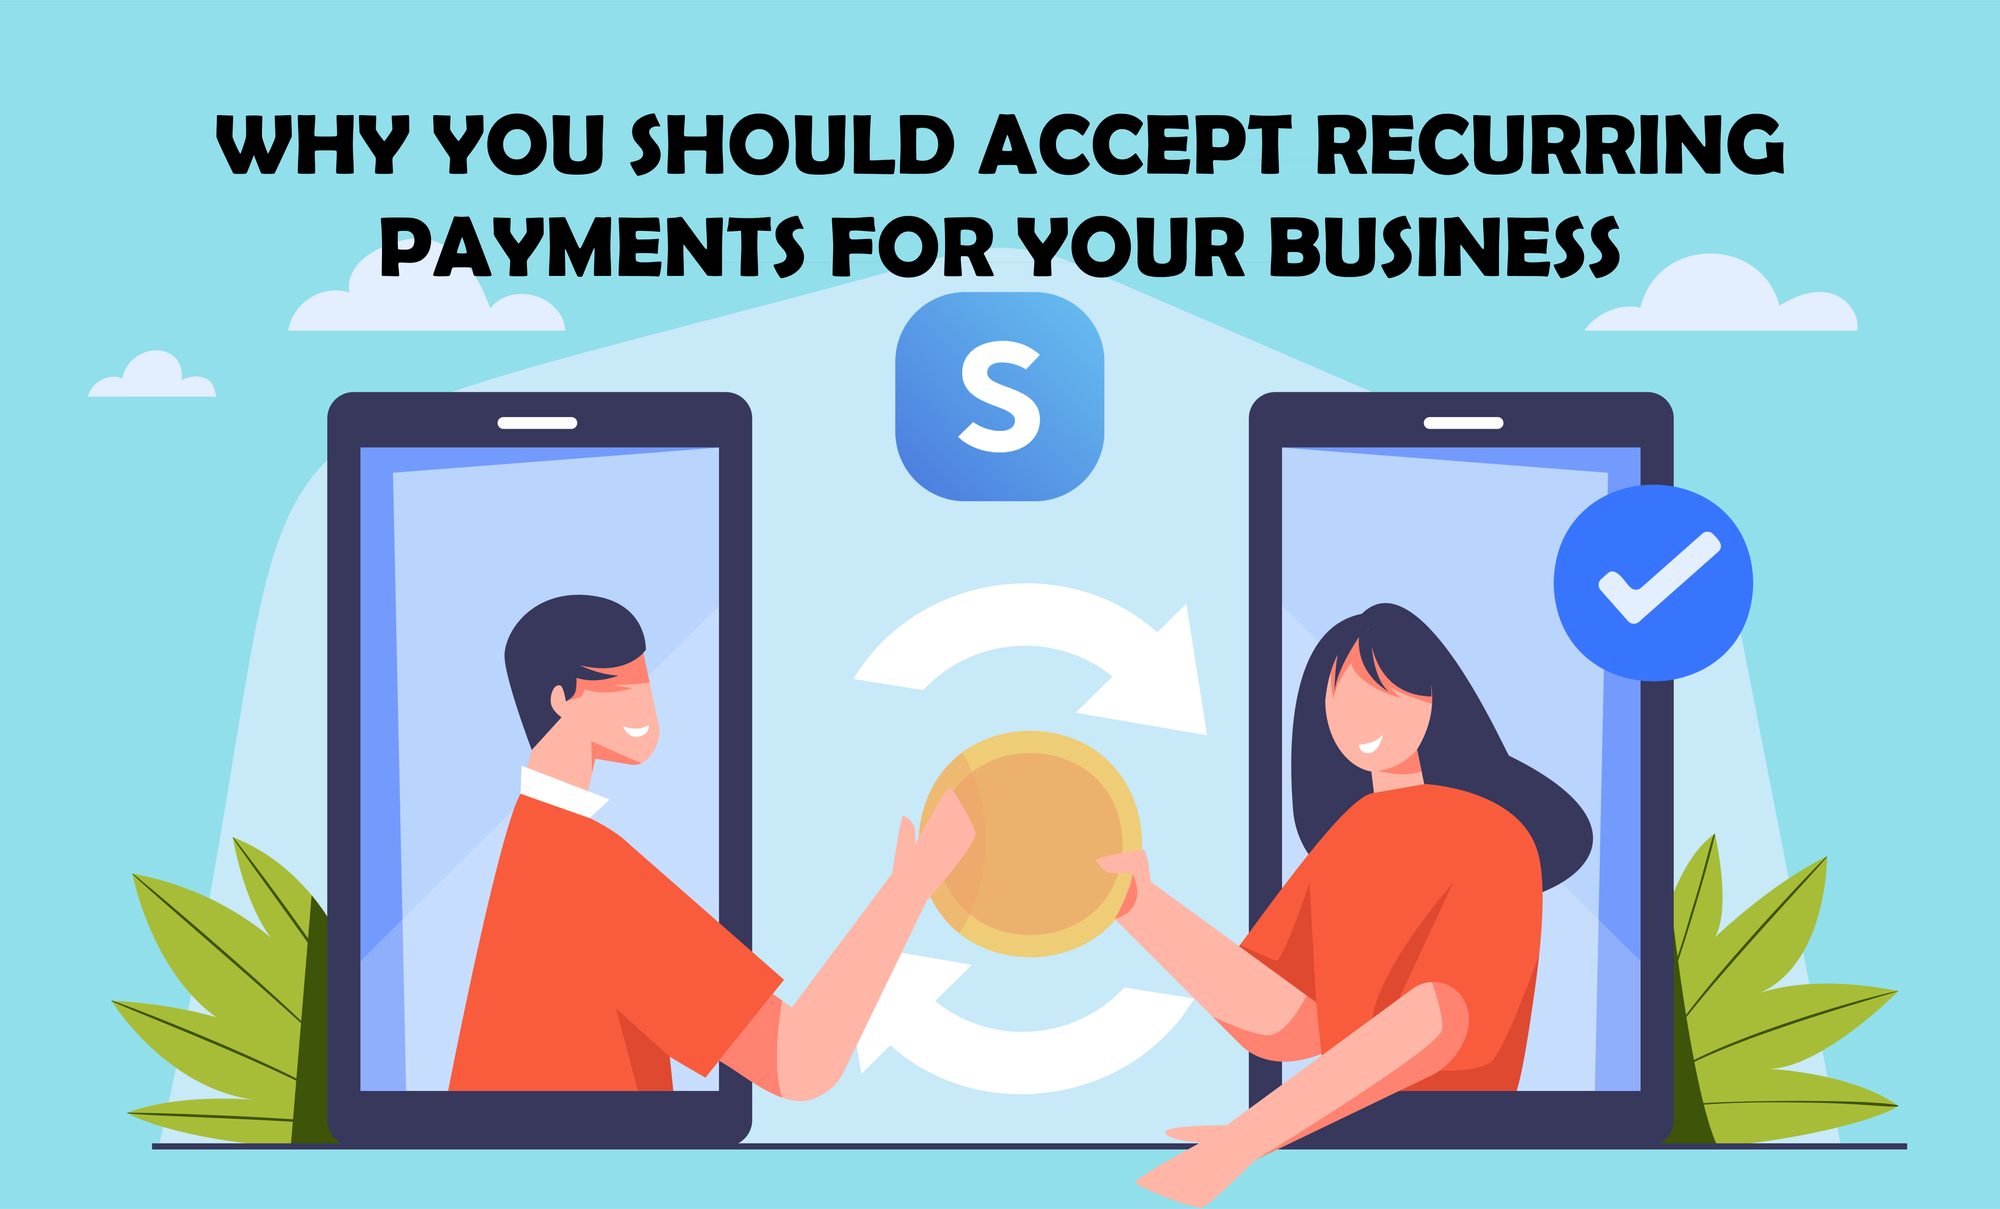 Reasons to Accept Recurring Payments for Your Business